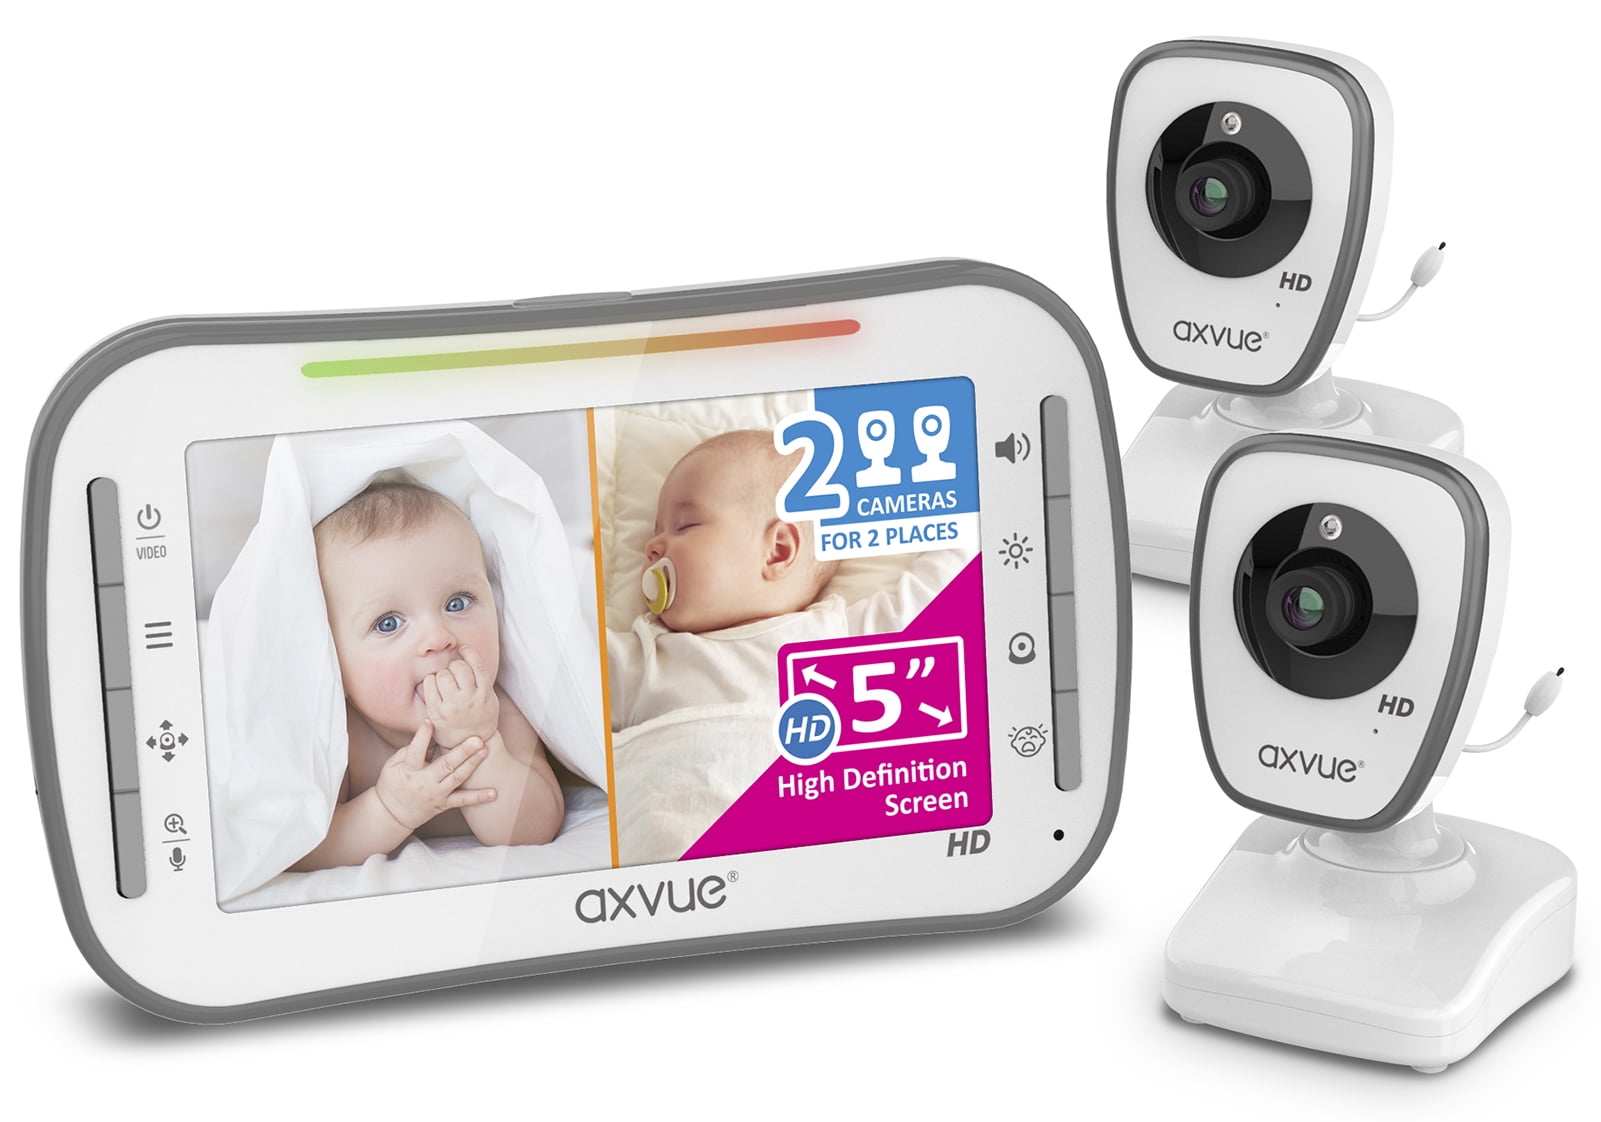 NEW UNIT 4.3" LCD Screen and 2 Camera Axvue E612 Video Baby Monitor 